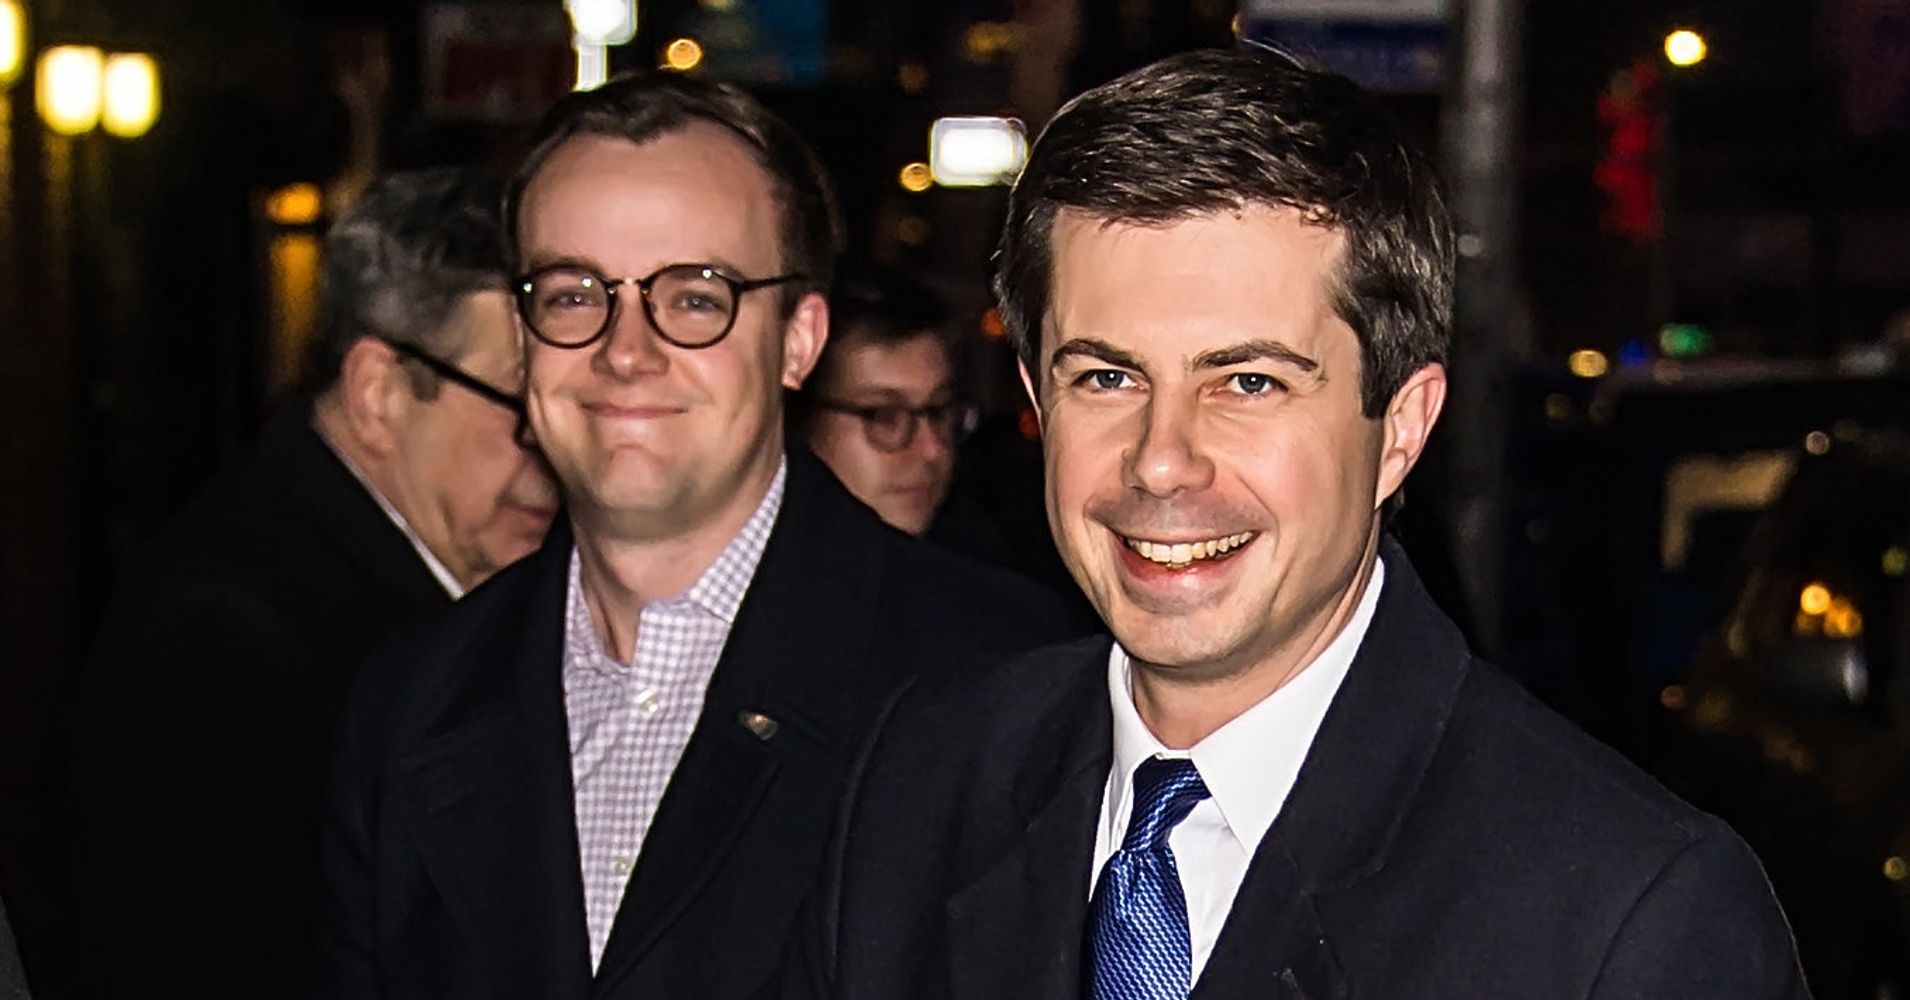 Pete Buttigieg To Mike Pence: Marrying My Husband 'Moved Me Closer To God' | HuffPost